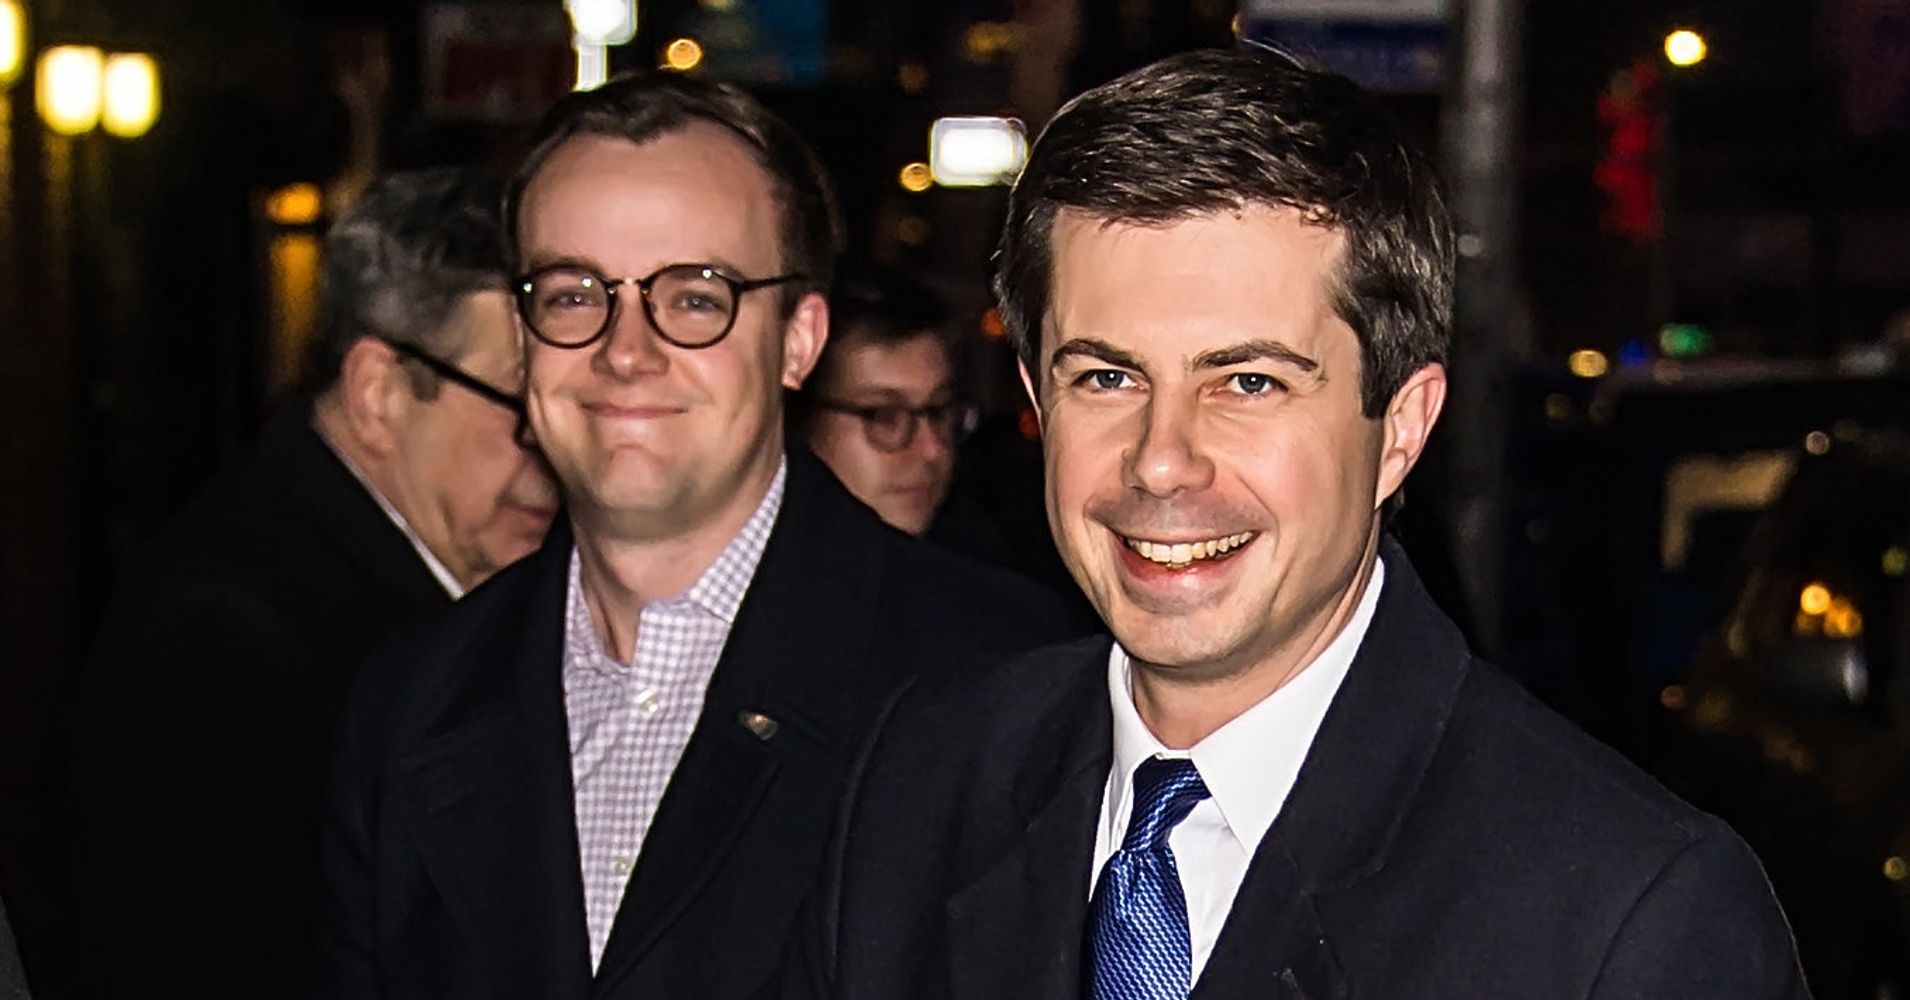 Pete Buttigieg To Mike Pence: Marrying My Husband 'Moved Me Closer To God' | HuffPost